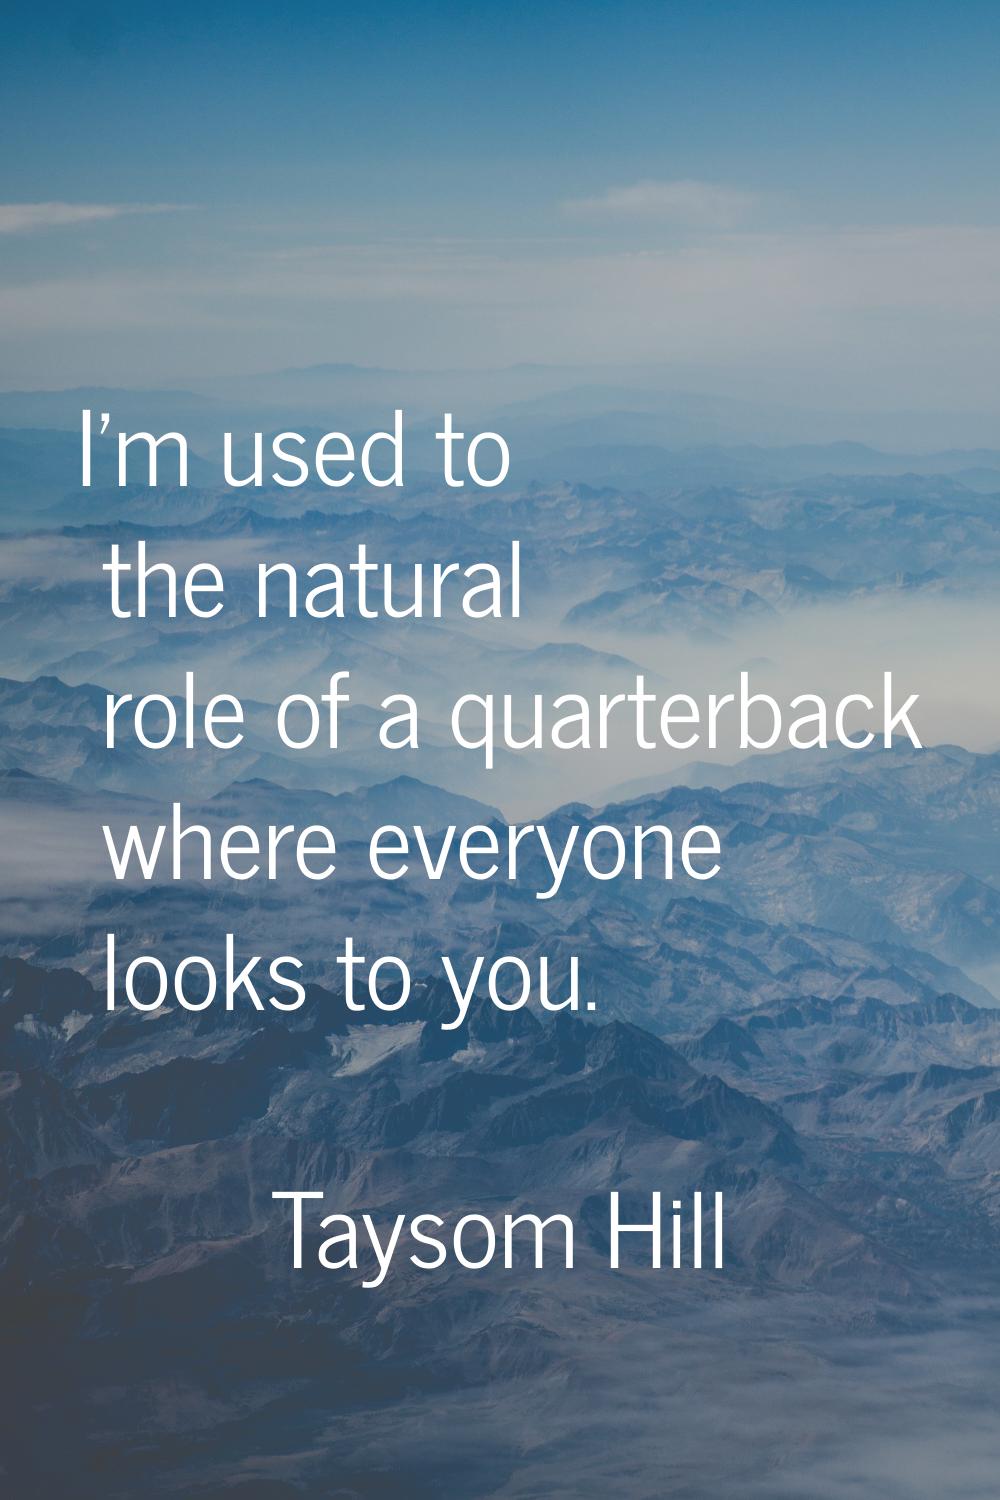 I'm used to the natural role of a quarterback where everyone looks to you.